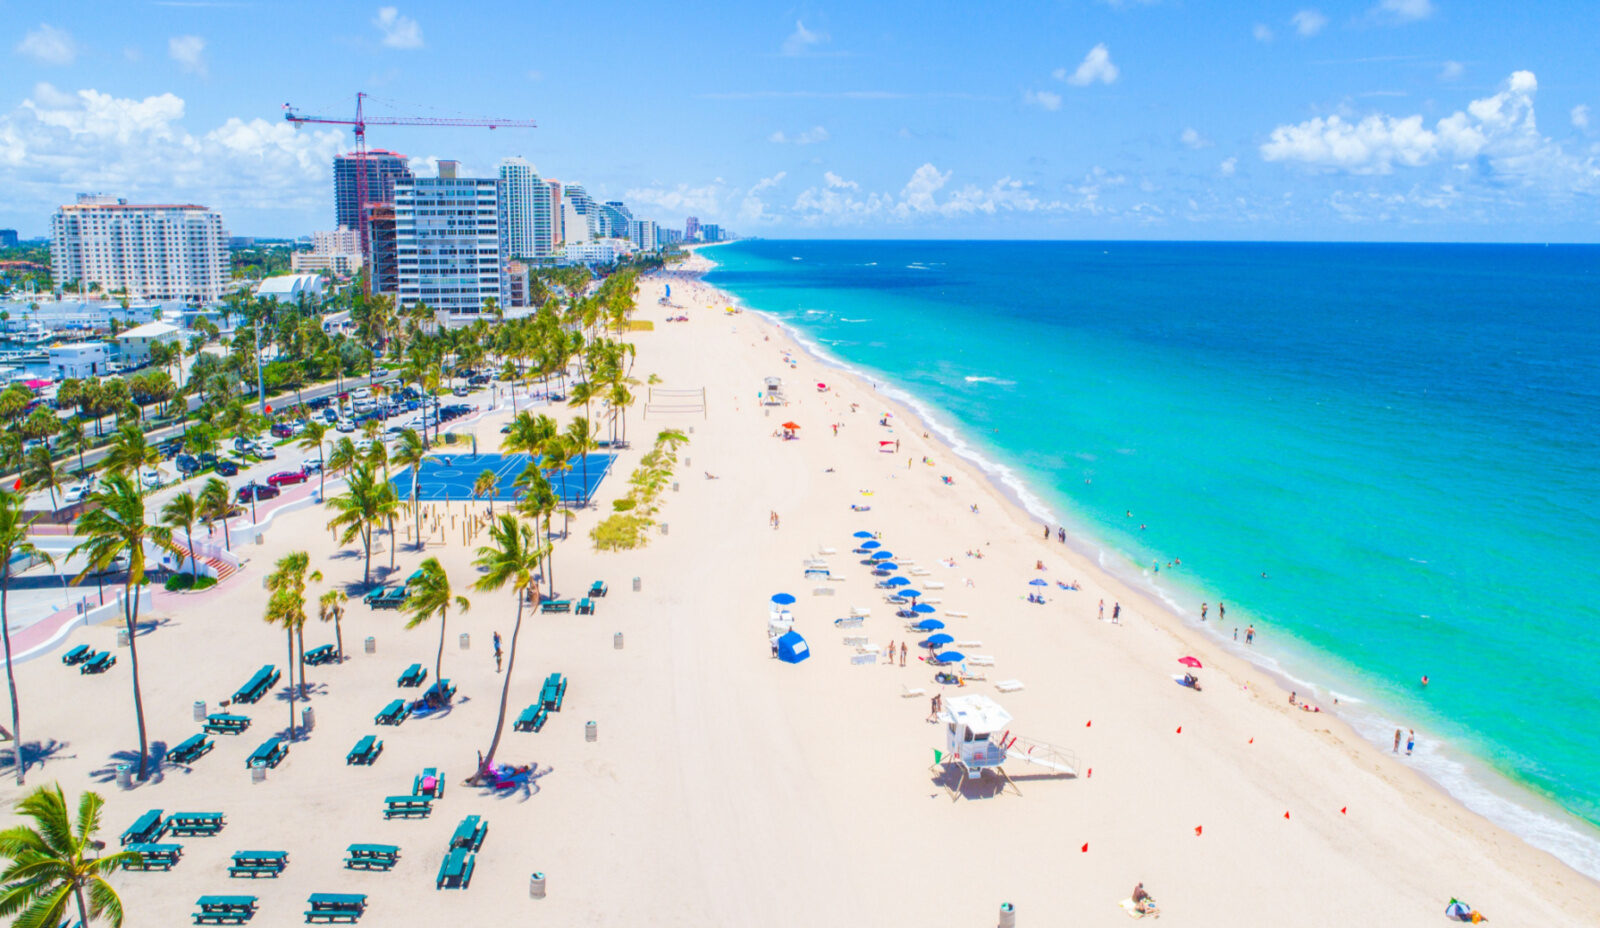 Direct flights from Ottawa to Fort Lauderdale (Miami) for 142 CAD round-trip including GST!